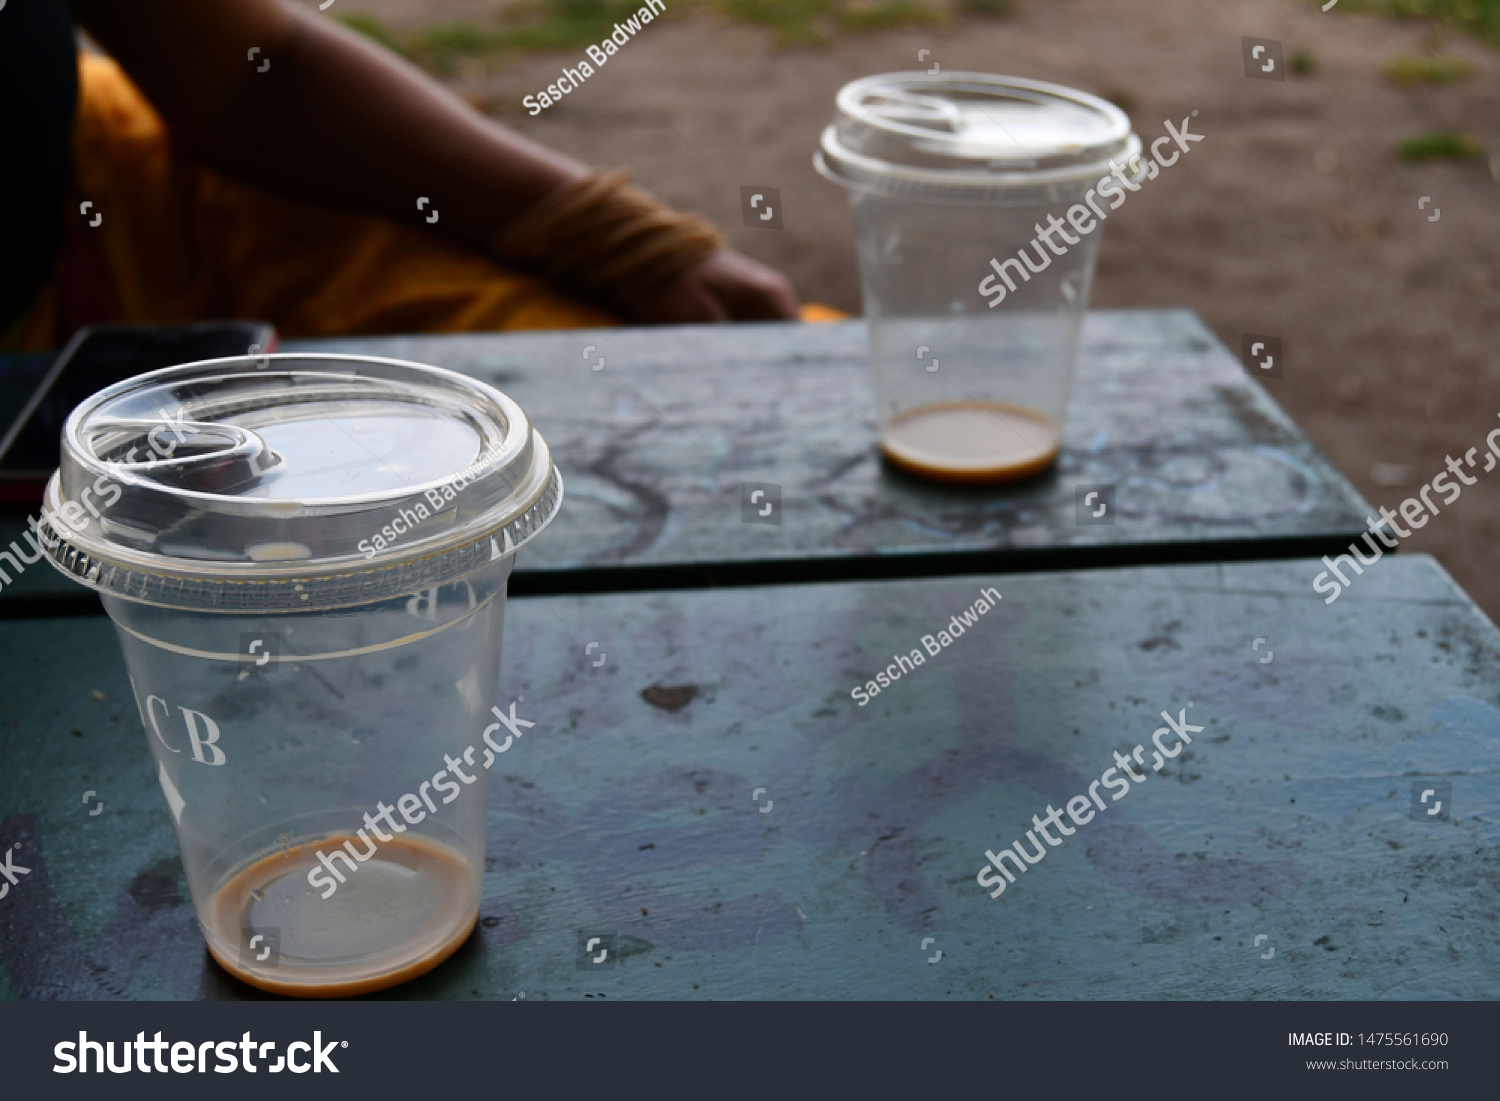 Toronto, Ontario: August 7, 2019: Two plastic cups on a park bench at Trinity Bellwoods Park between friends. #1475561690